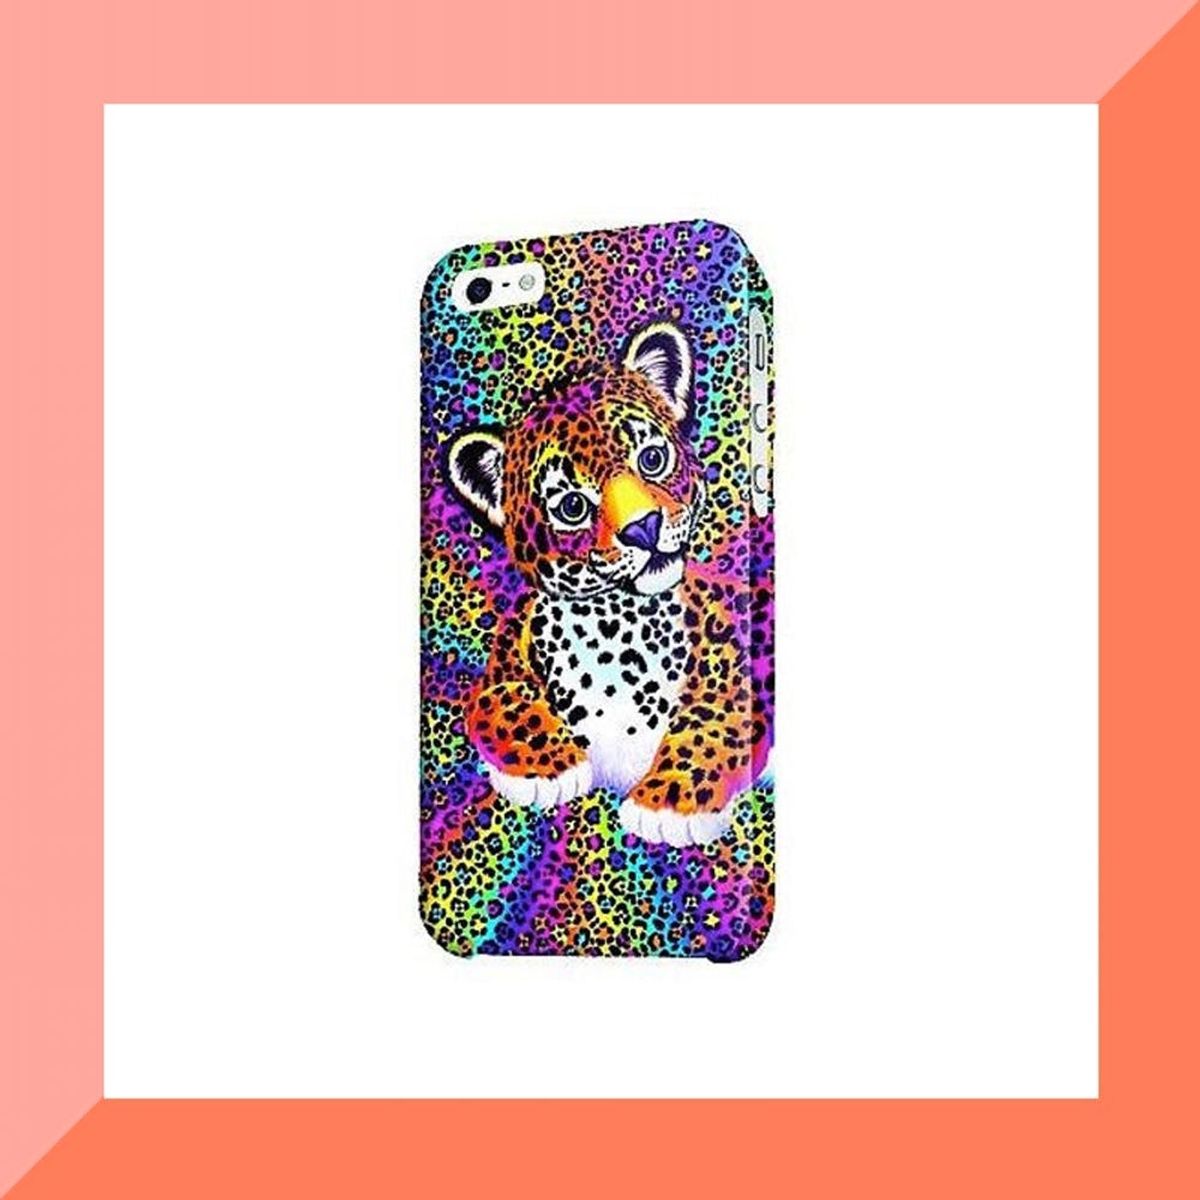 13 Lisa Frank Tech Accessories You Can Totally Rock As an Adult